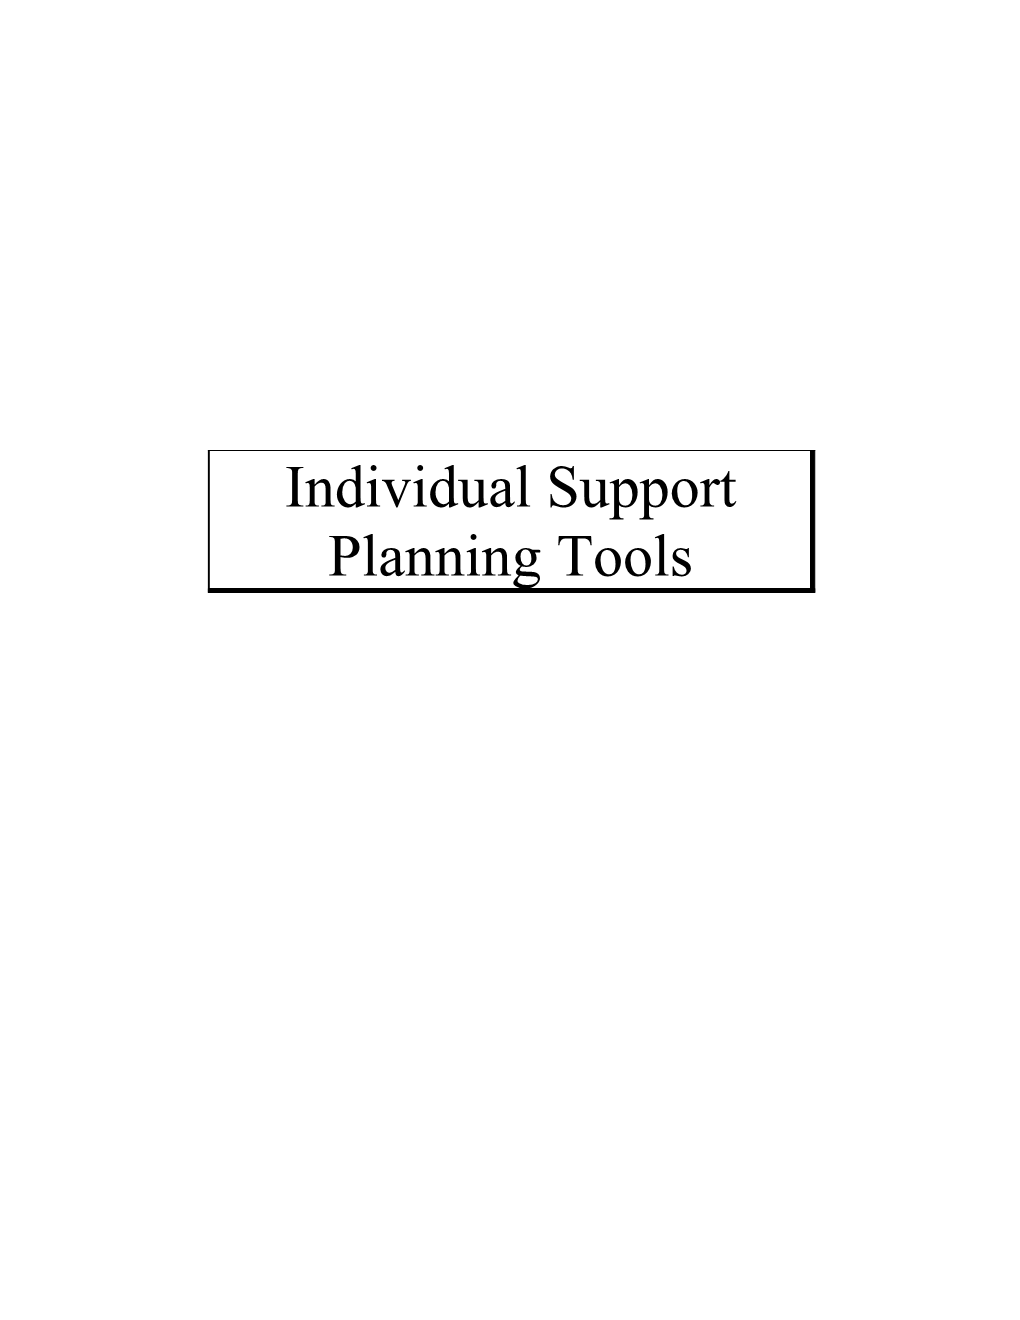 Purpose of the Individual Support Plan (ISP)